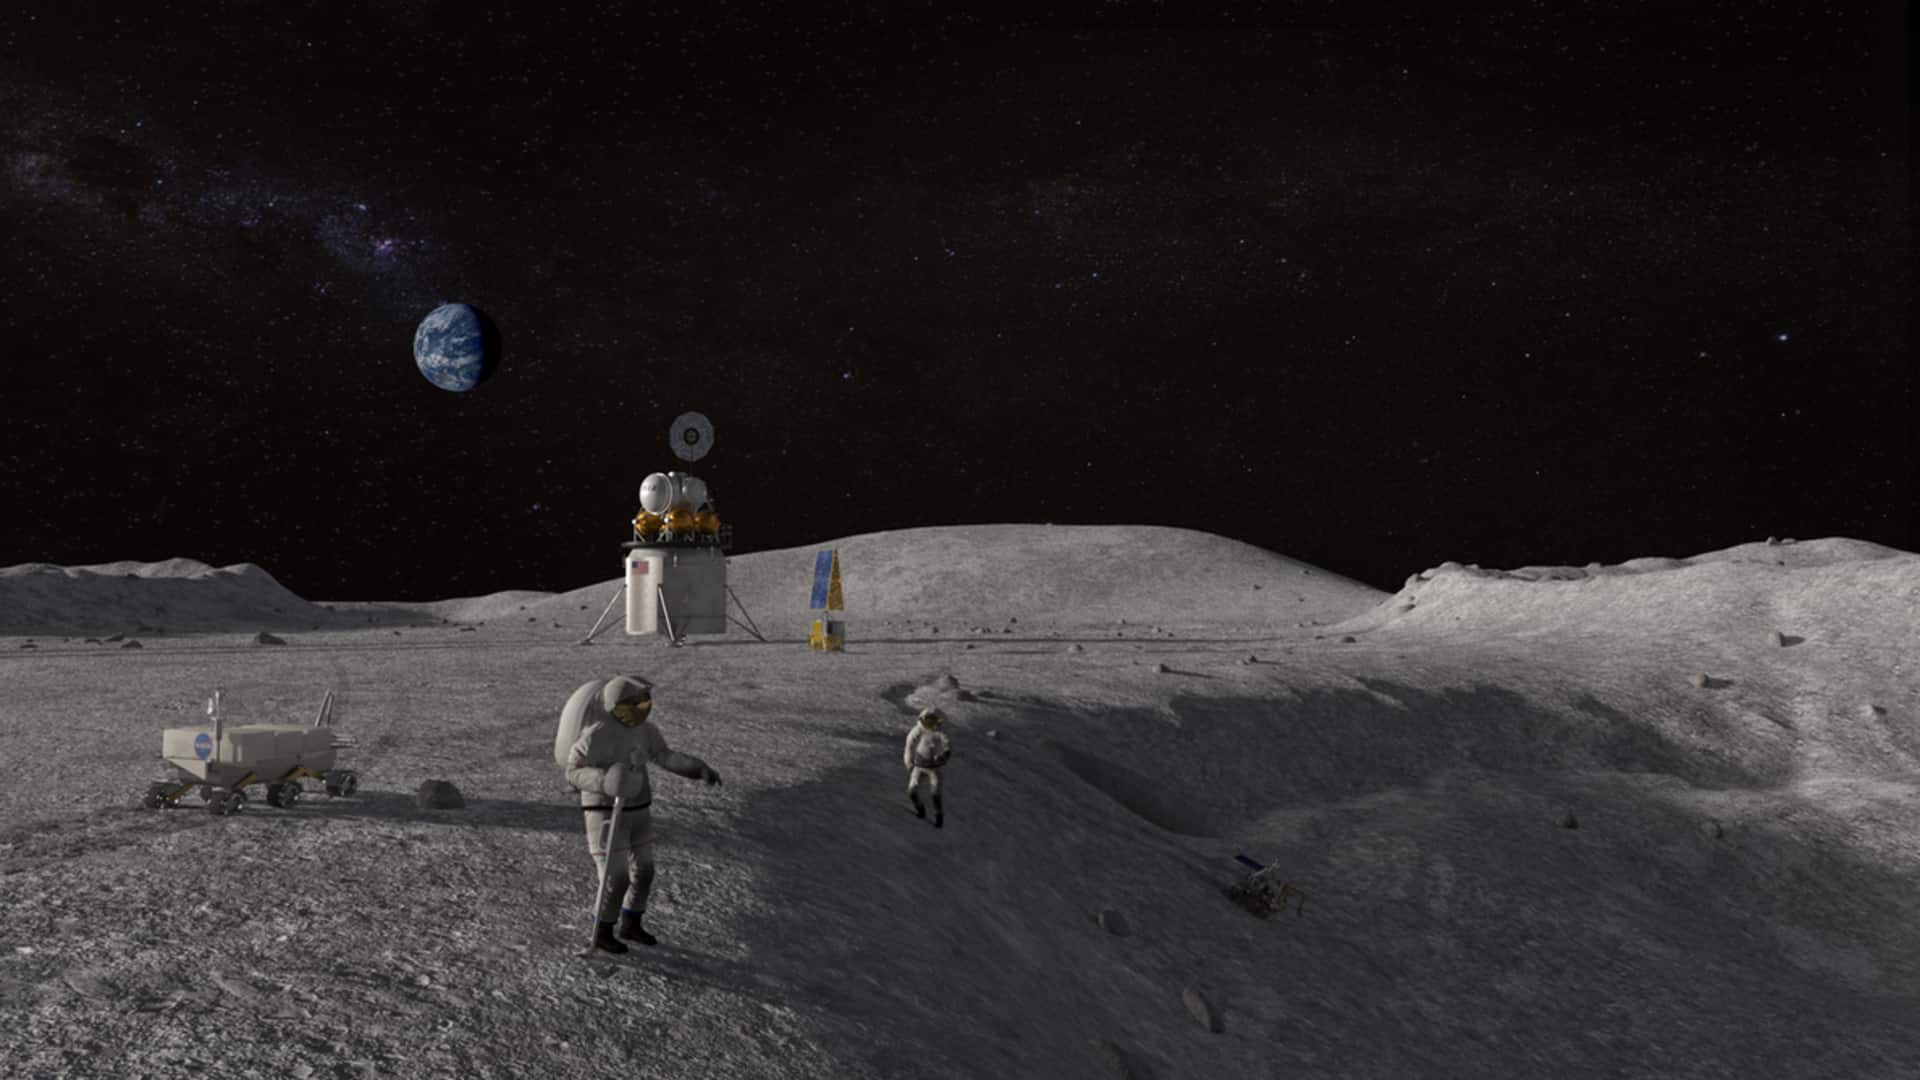 India plans to send astronauts to Moon by 2040 